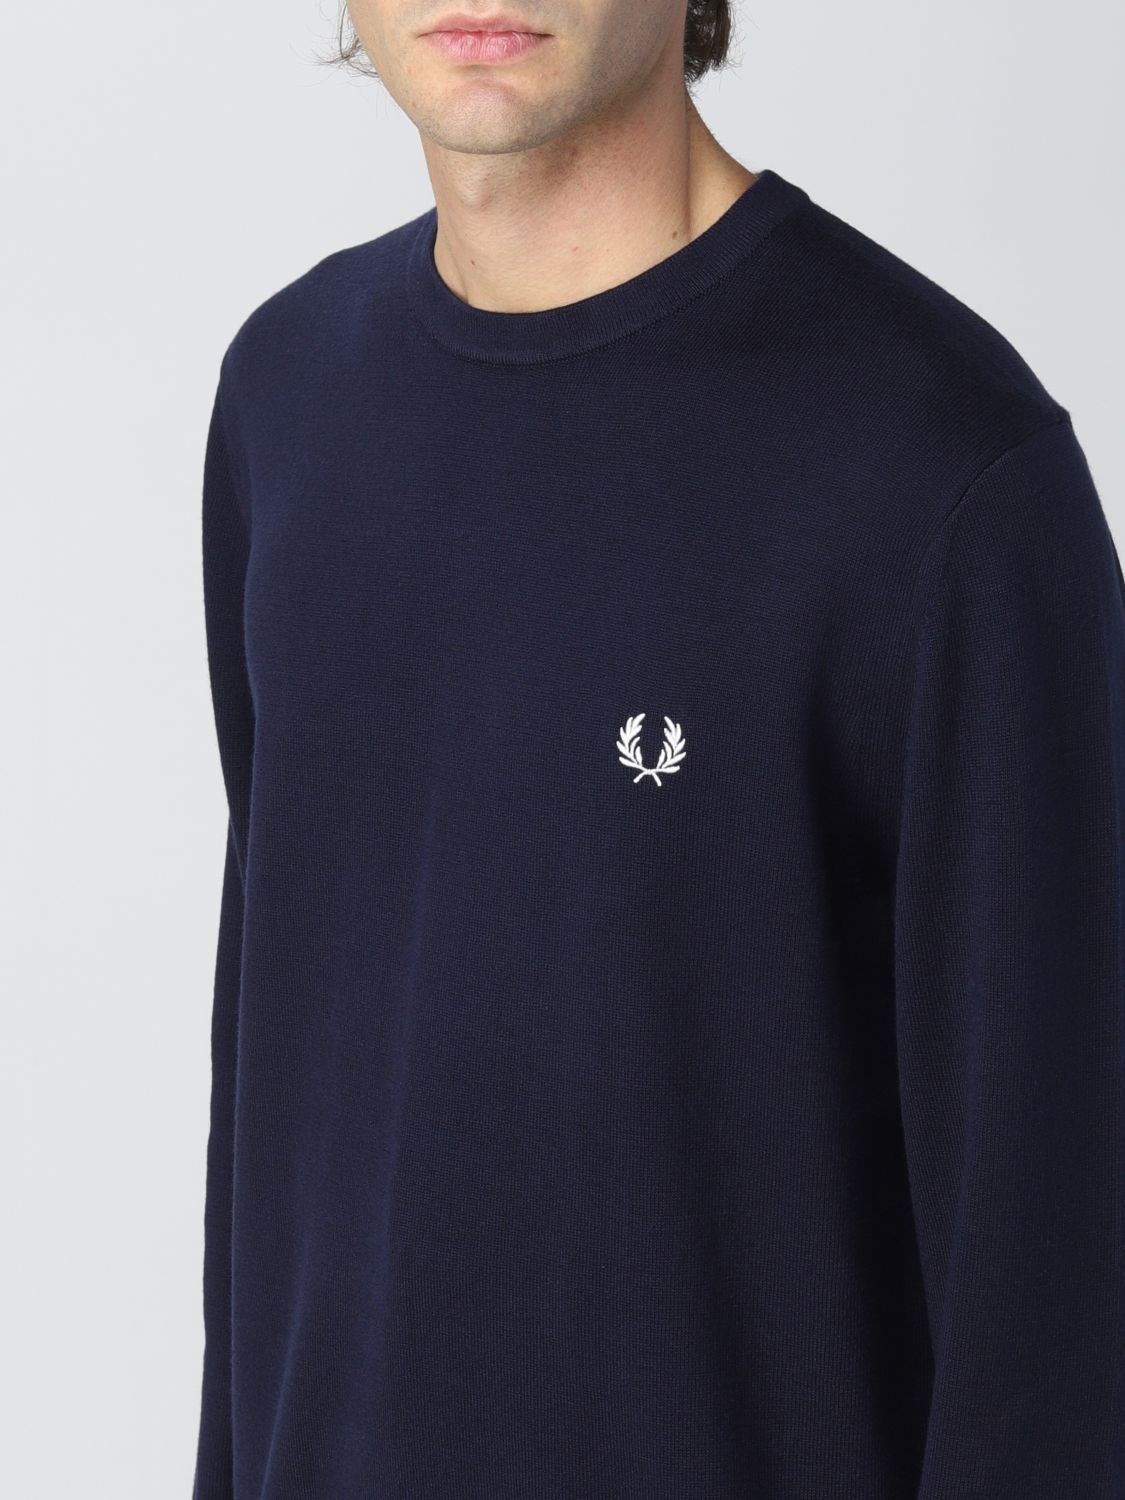 Pullover Fred Perry: Fred Perry Herren Pullover navy 3